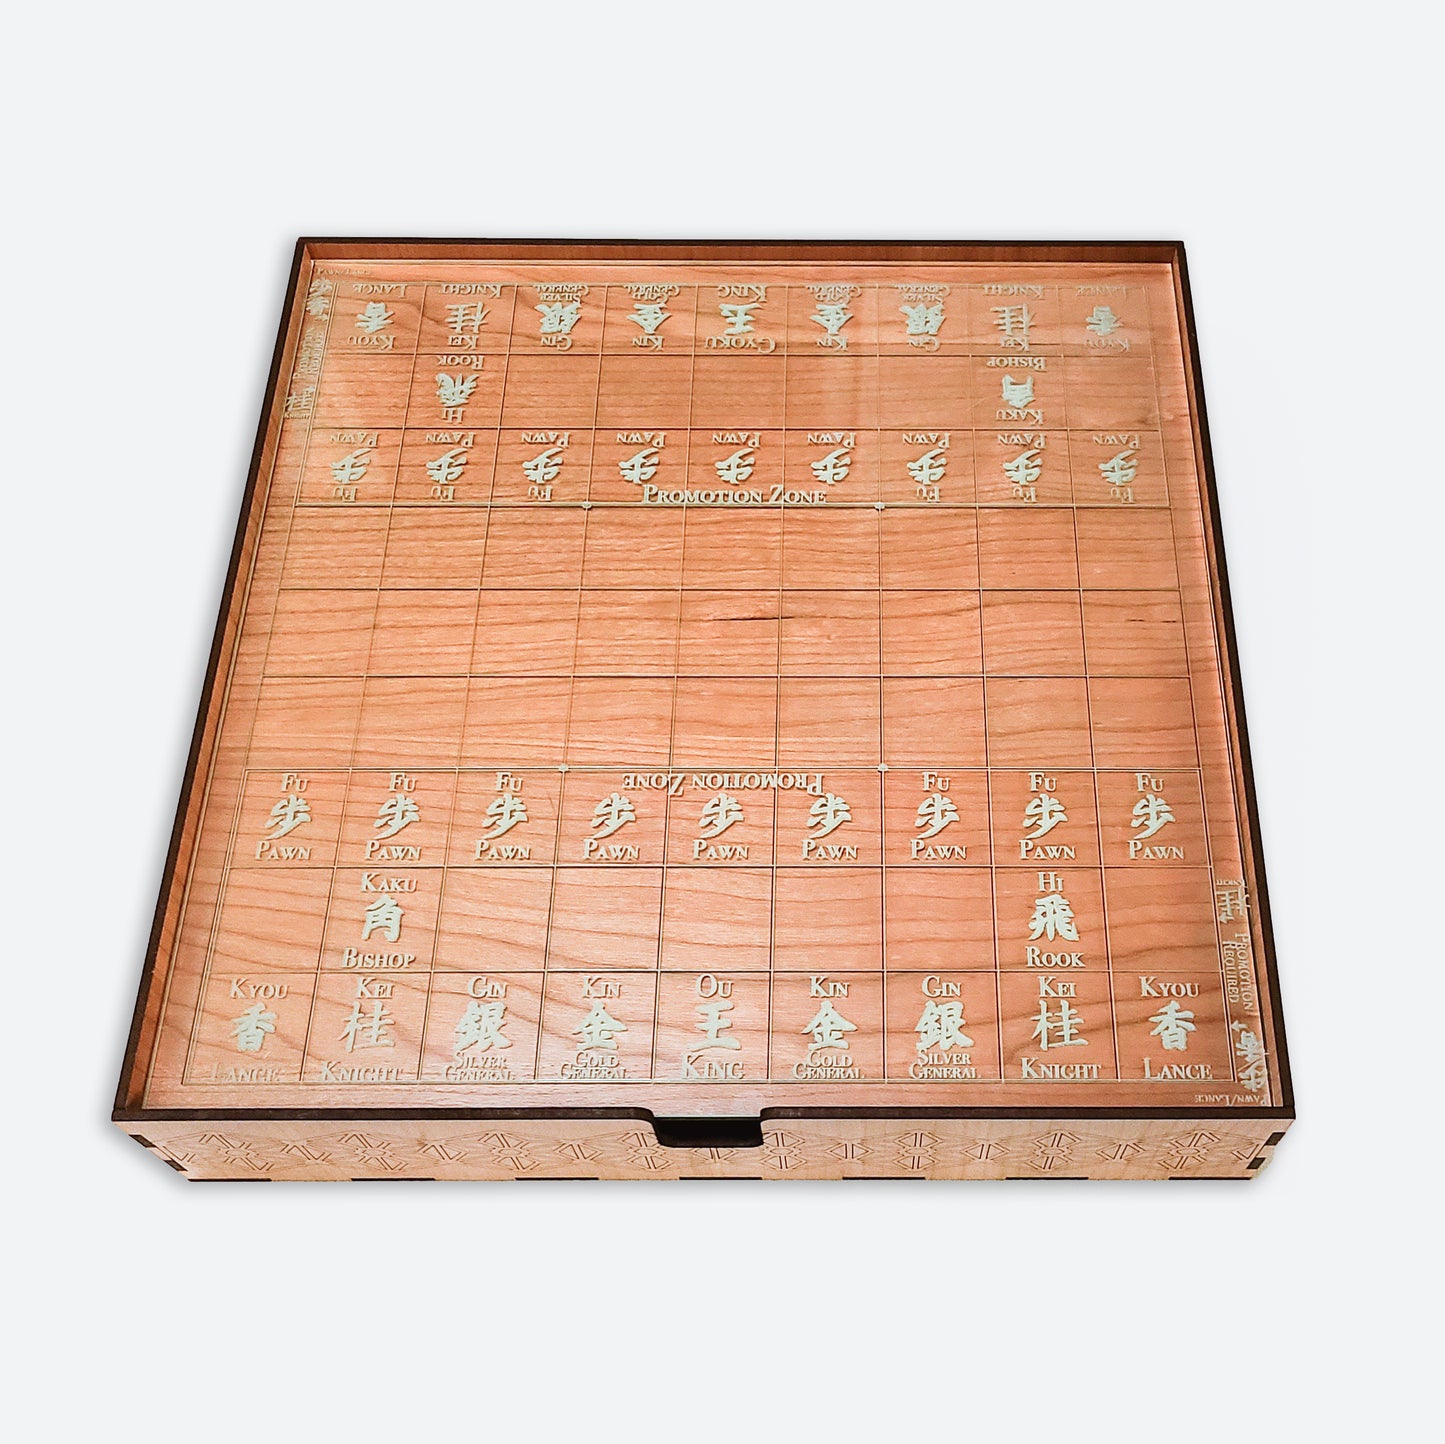 What is Shogi? — The appeal of Japanese Chess